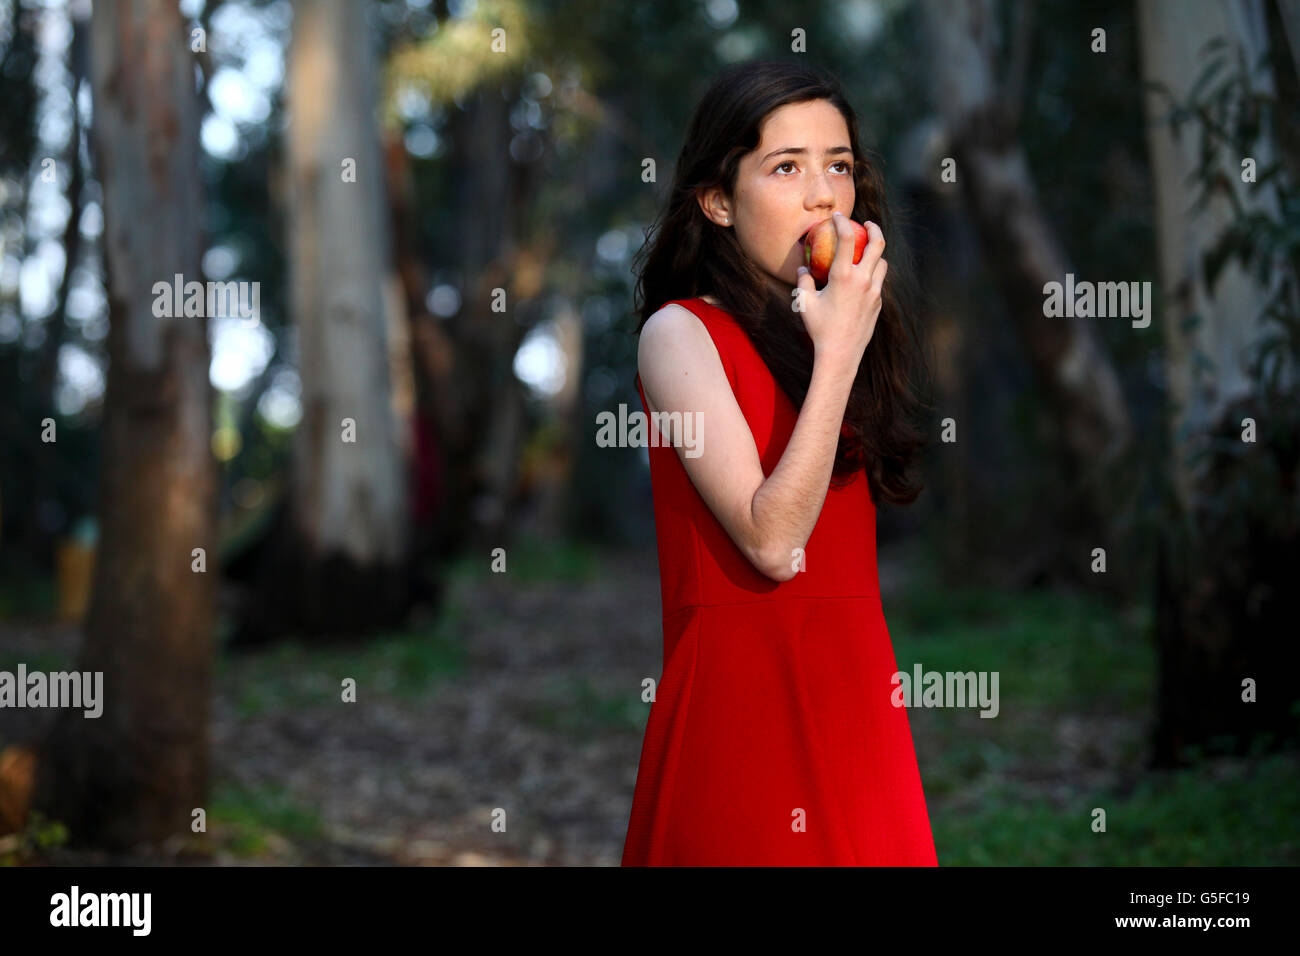 Young girl in red dress eats an apple outdoors Stock Photo